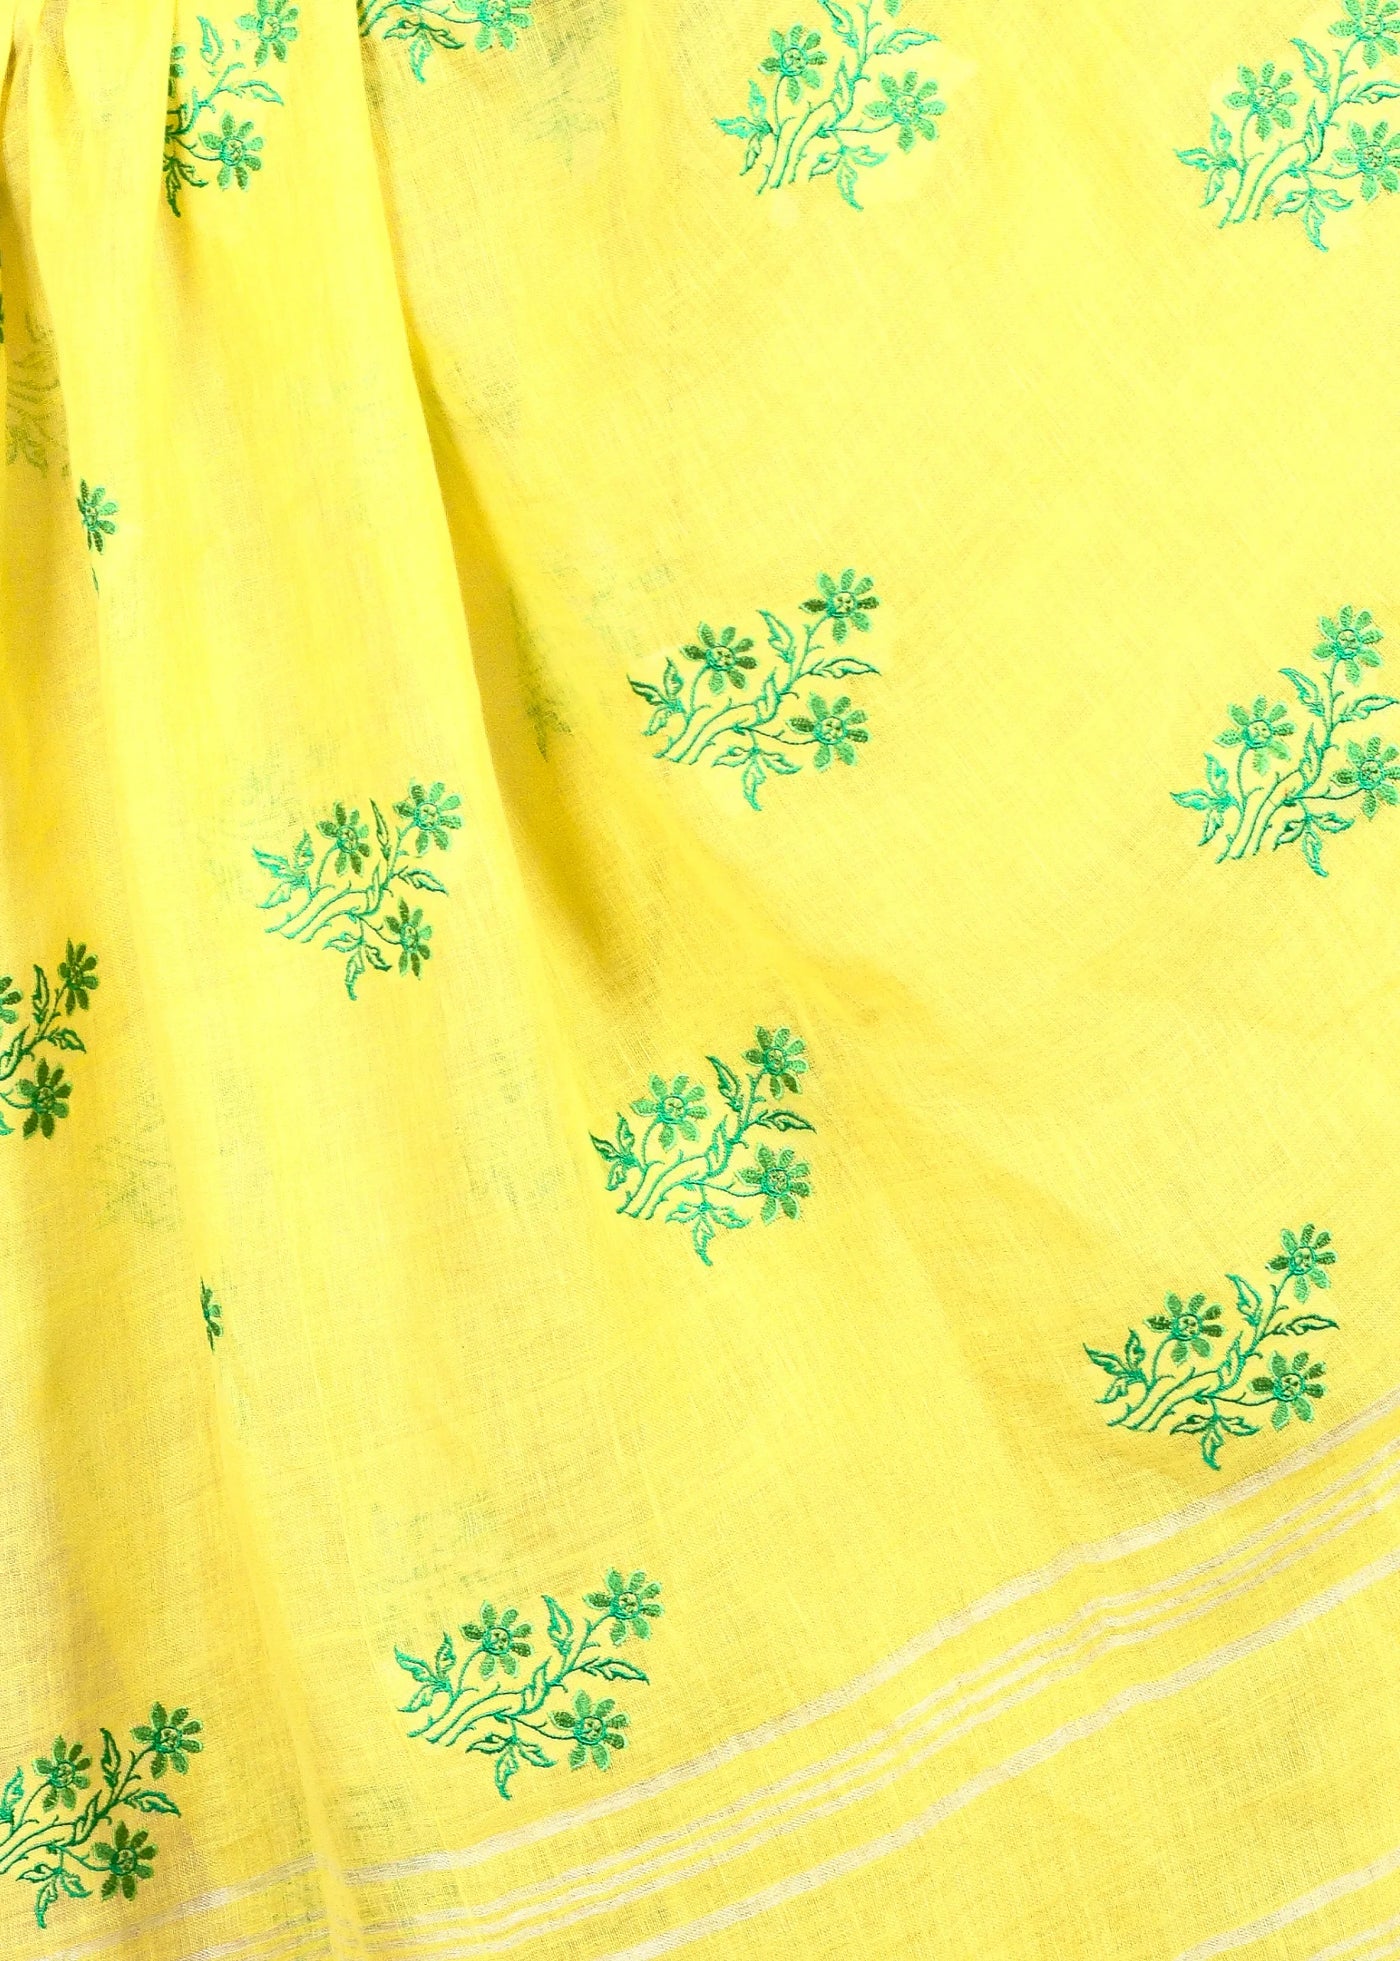 Yellow Pure Linen Floral Embroidery Saree With Jadi Border pompom